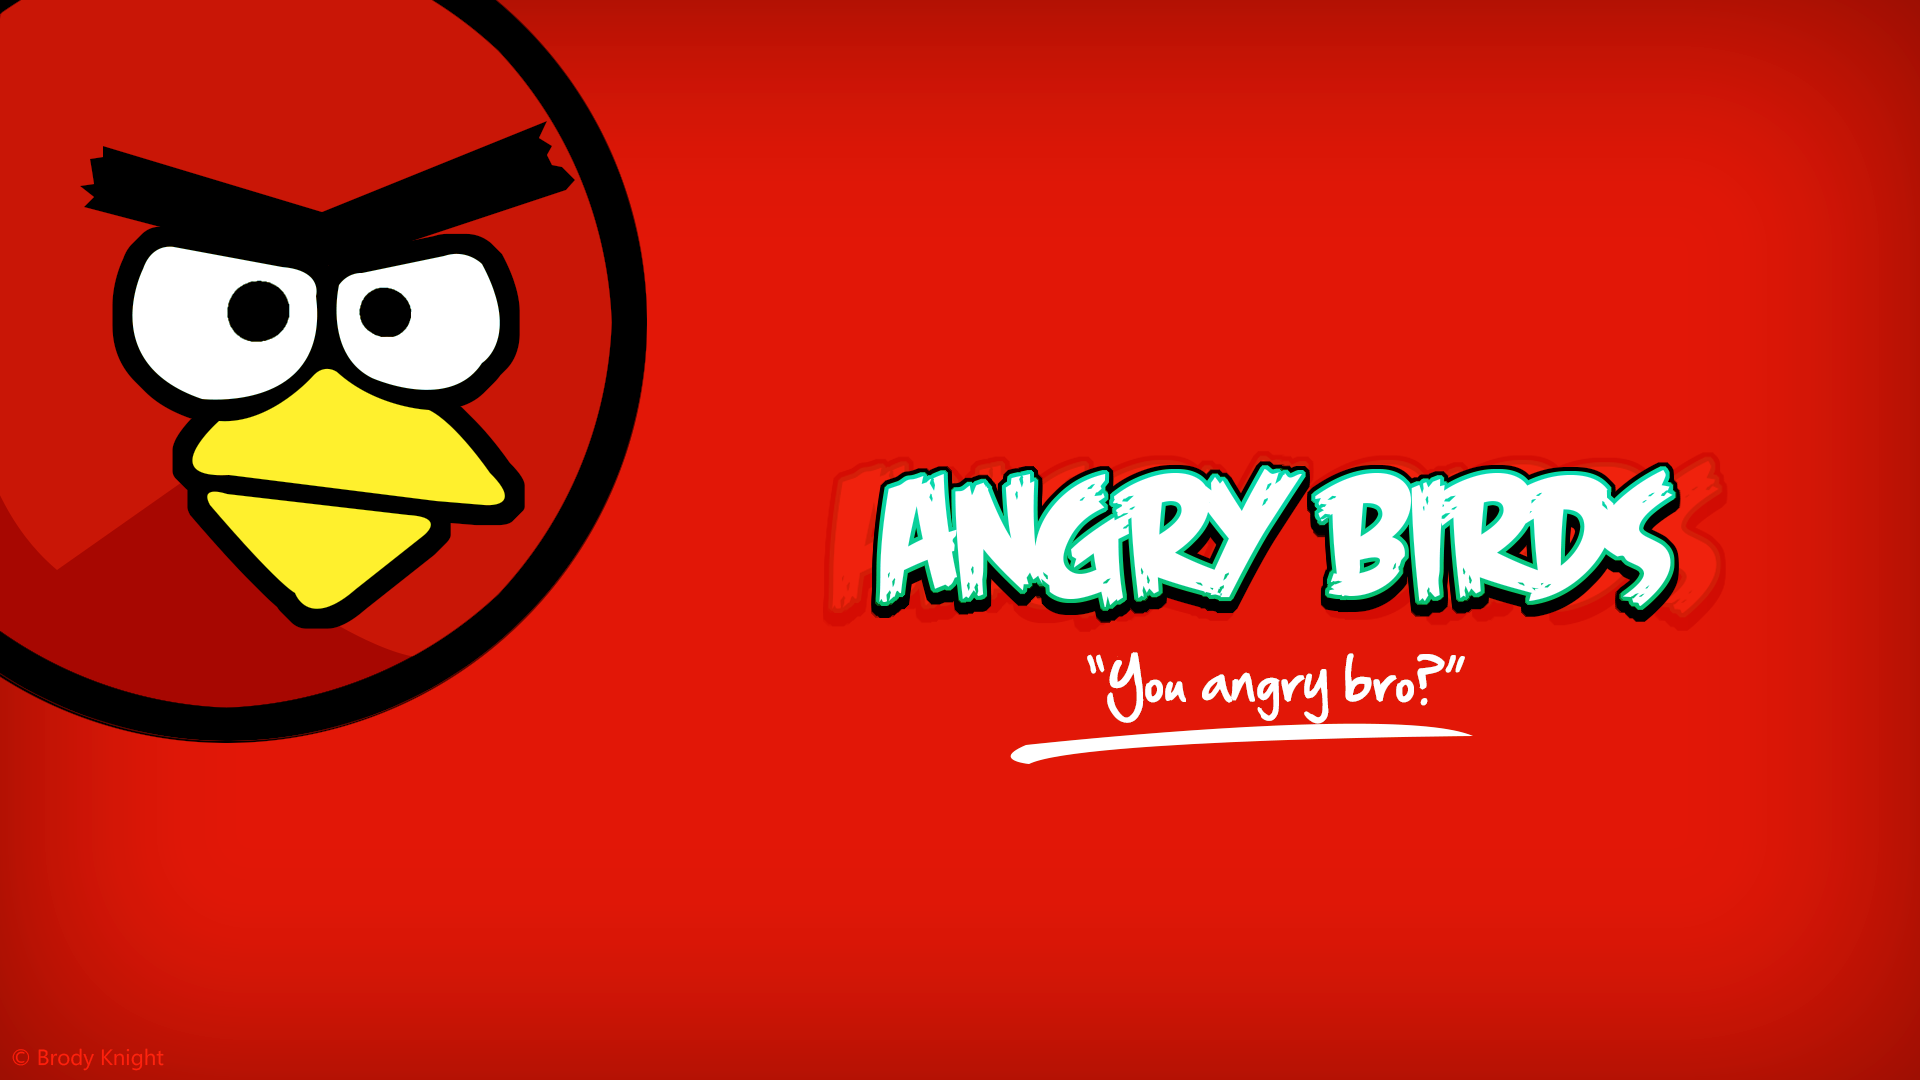 Angry Birds Red Hd Background Wallpaper - Angry Birds Desktop Wallpaper Hd - HD Wallpaper 